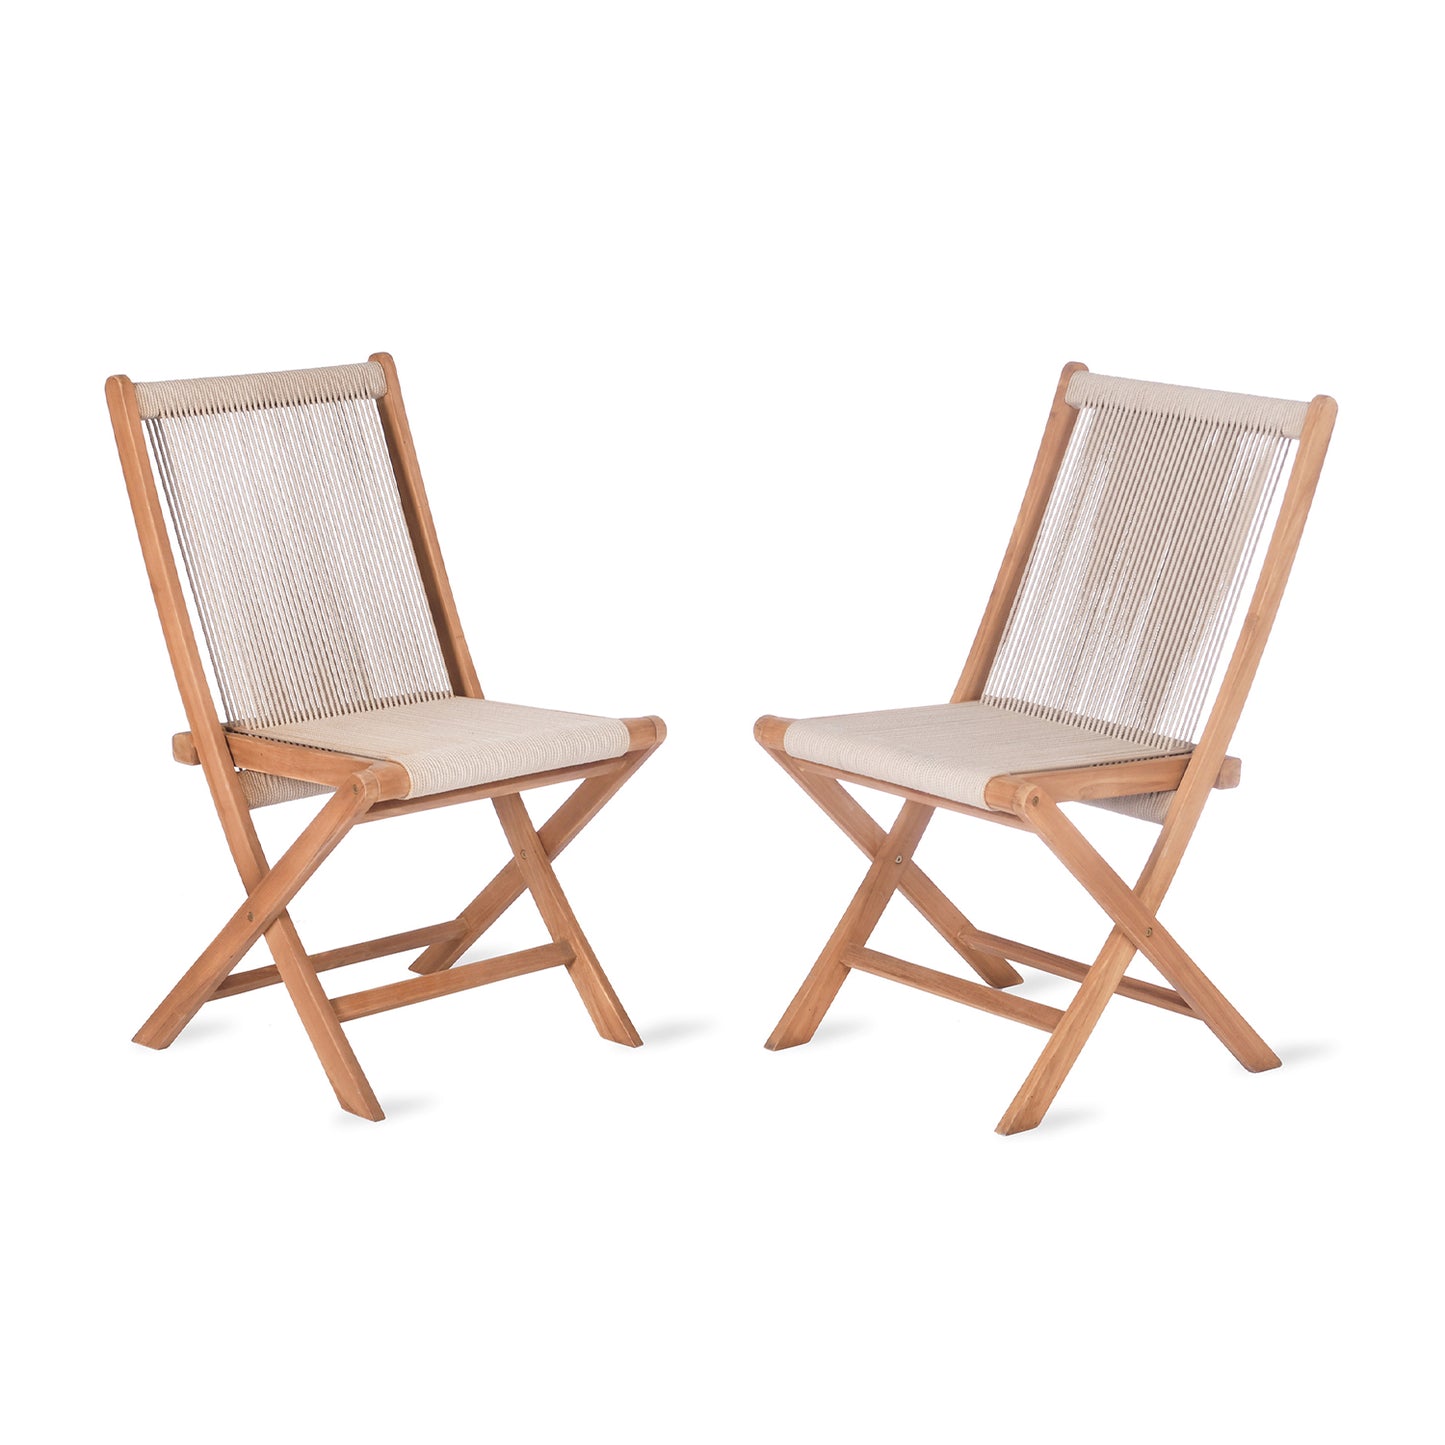 Pair of Carrick Outdoor Foldable Chairs Teak and Poly Rope by Garden Trading